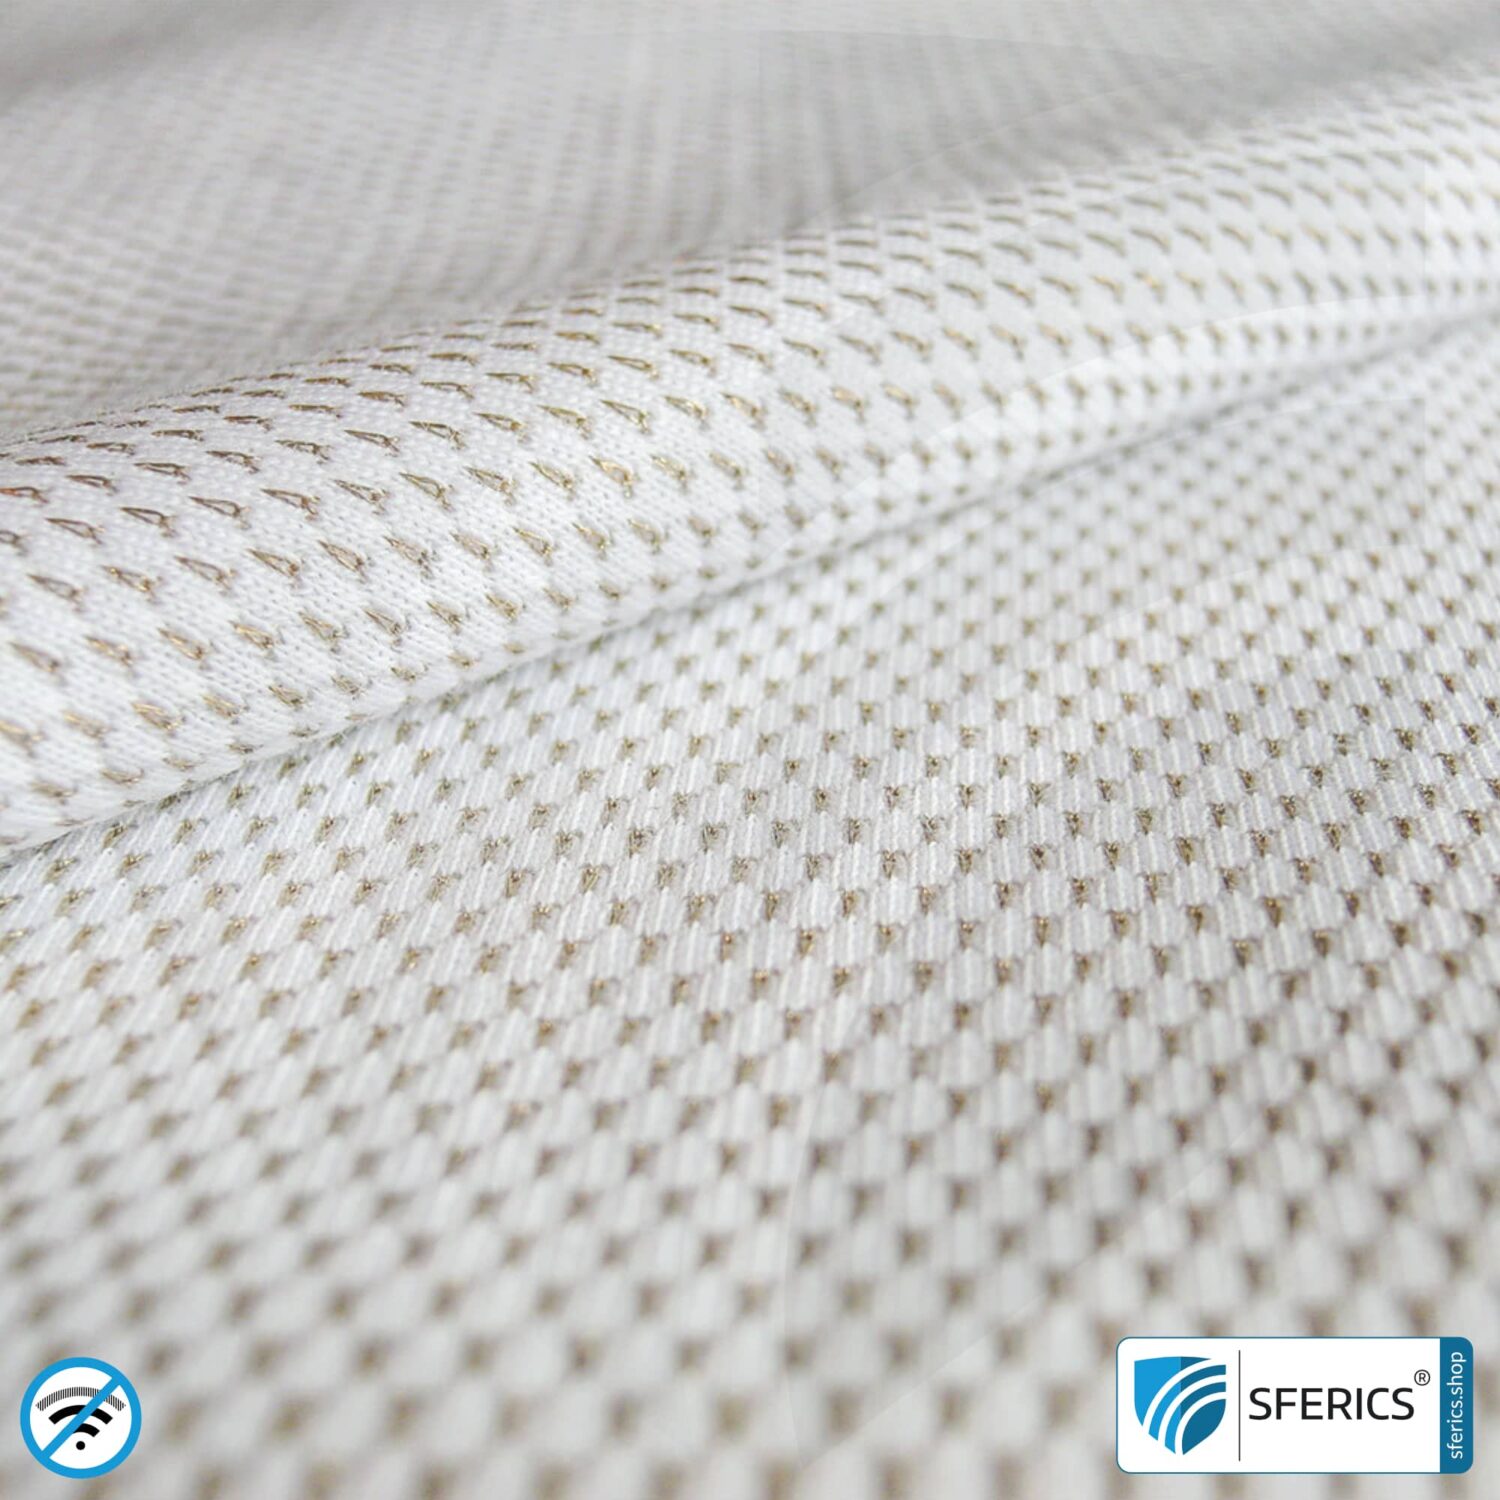 NEW ANTIWAVE shielding fabric | ideal for production of shielding clothing and underwear | white | RF screening attenuation against electrosmog up to 33 dB | 5G ready!